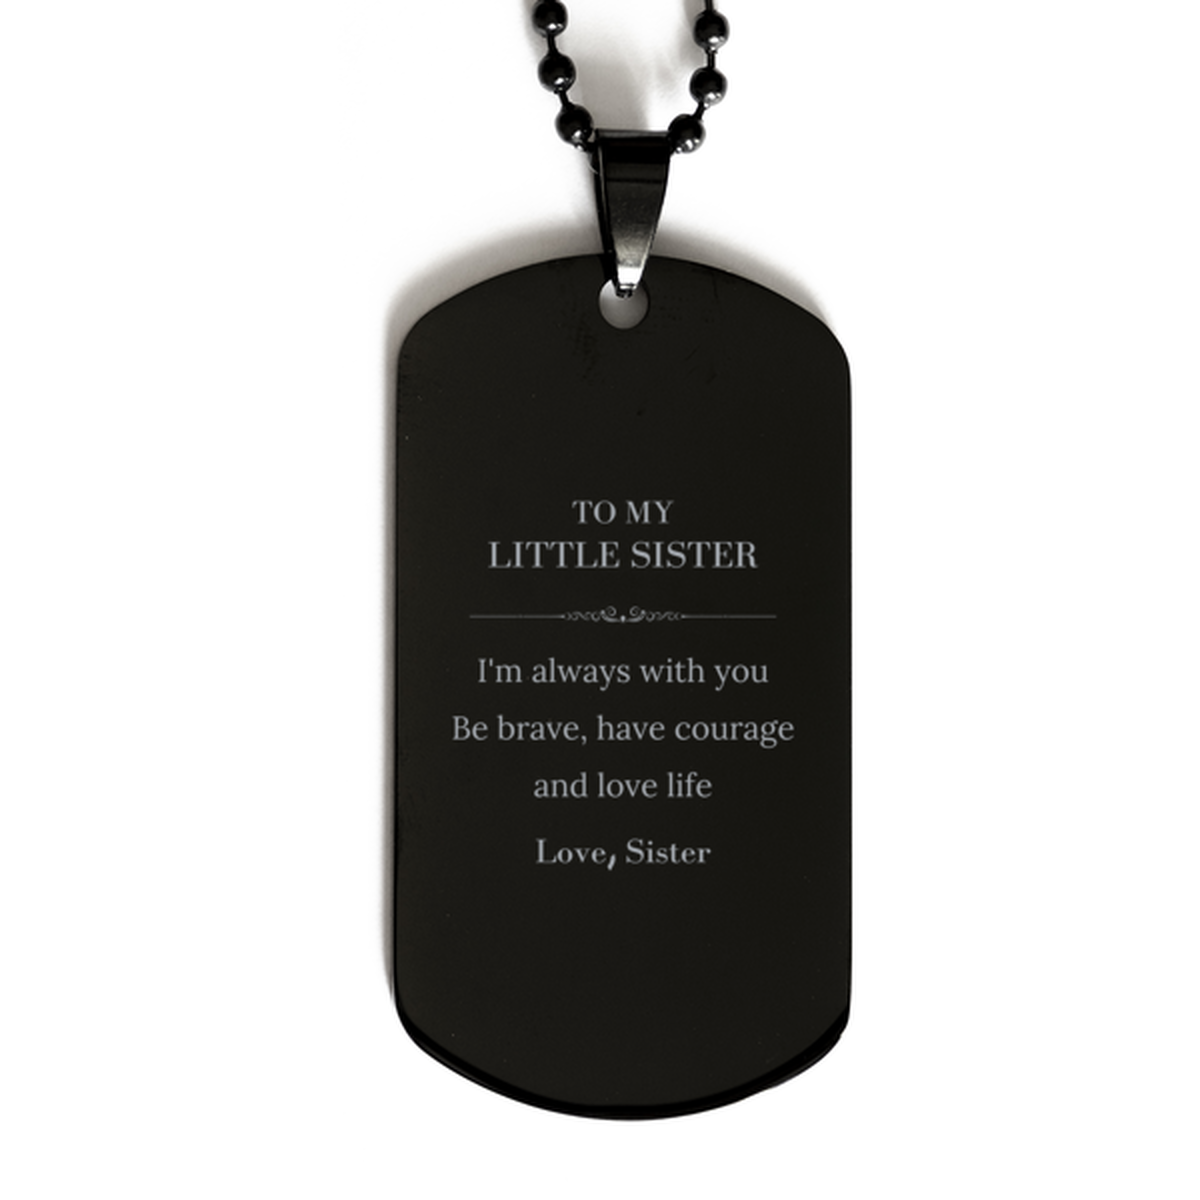 To My Little Sister Gifts from Sister, Unique Black Dog Tag Inspirational Christmas Birthday Graduation Gifts for Little Sister I'm always with you. Be brave, have courage and love life. Love, Sister